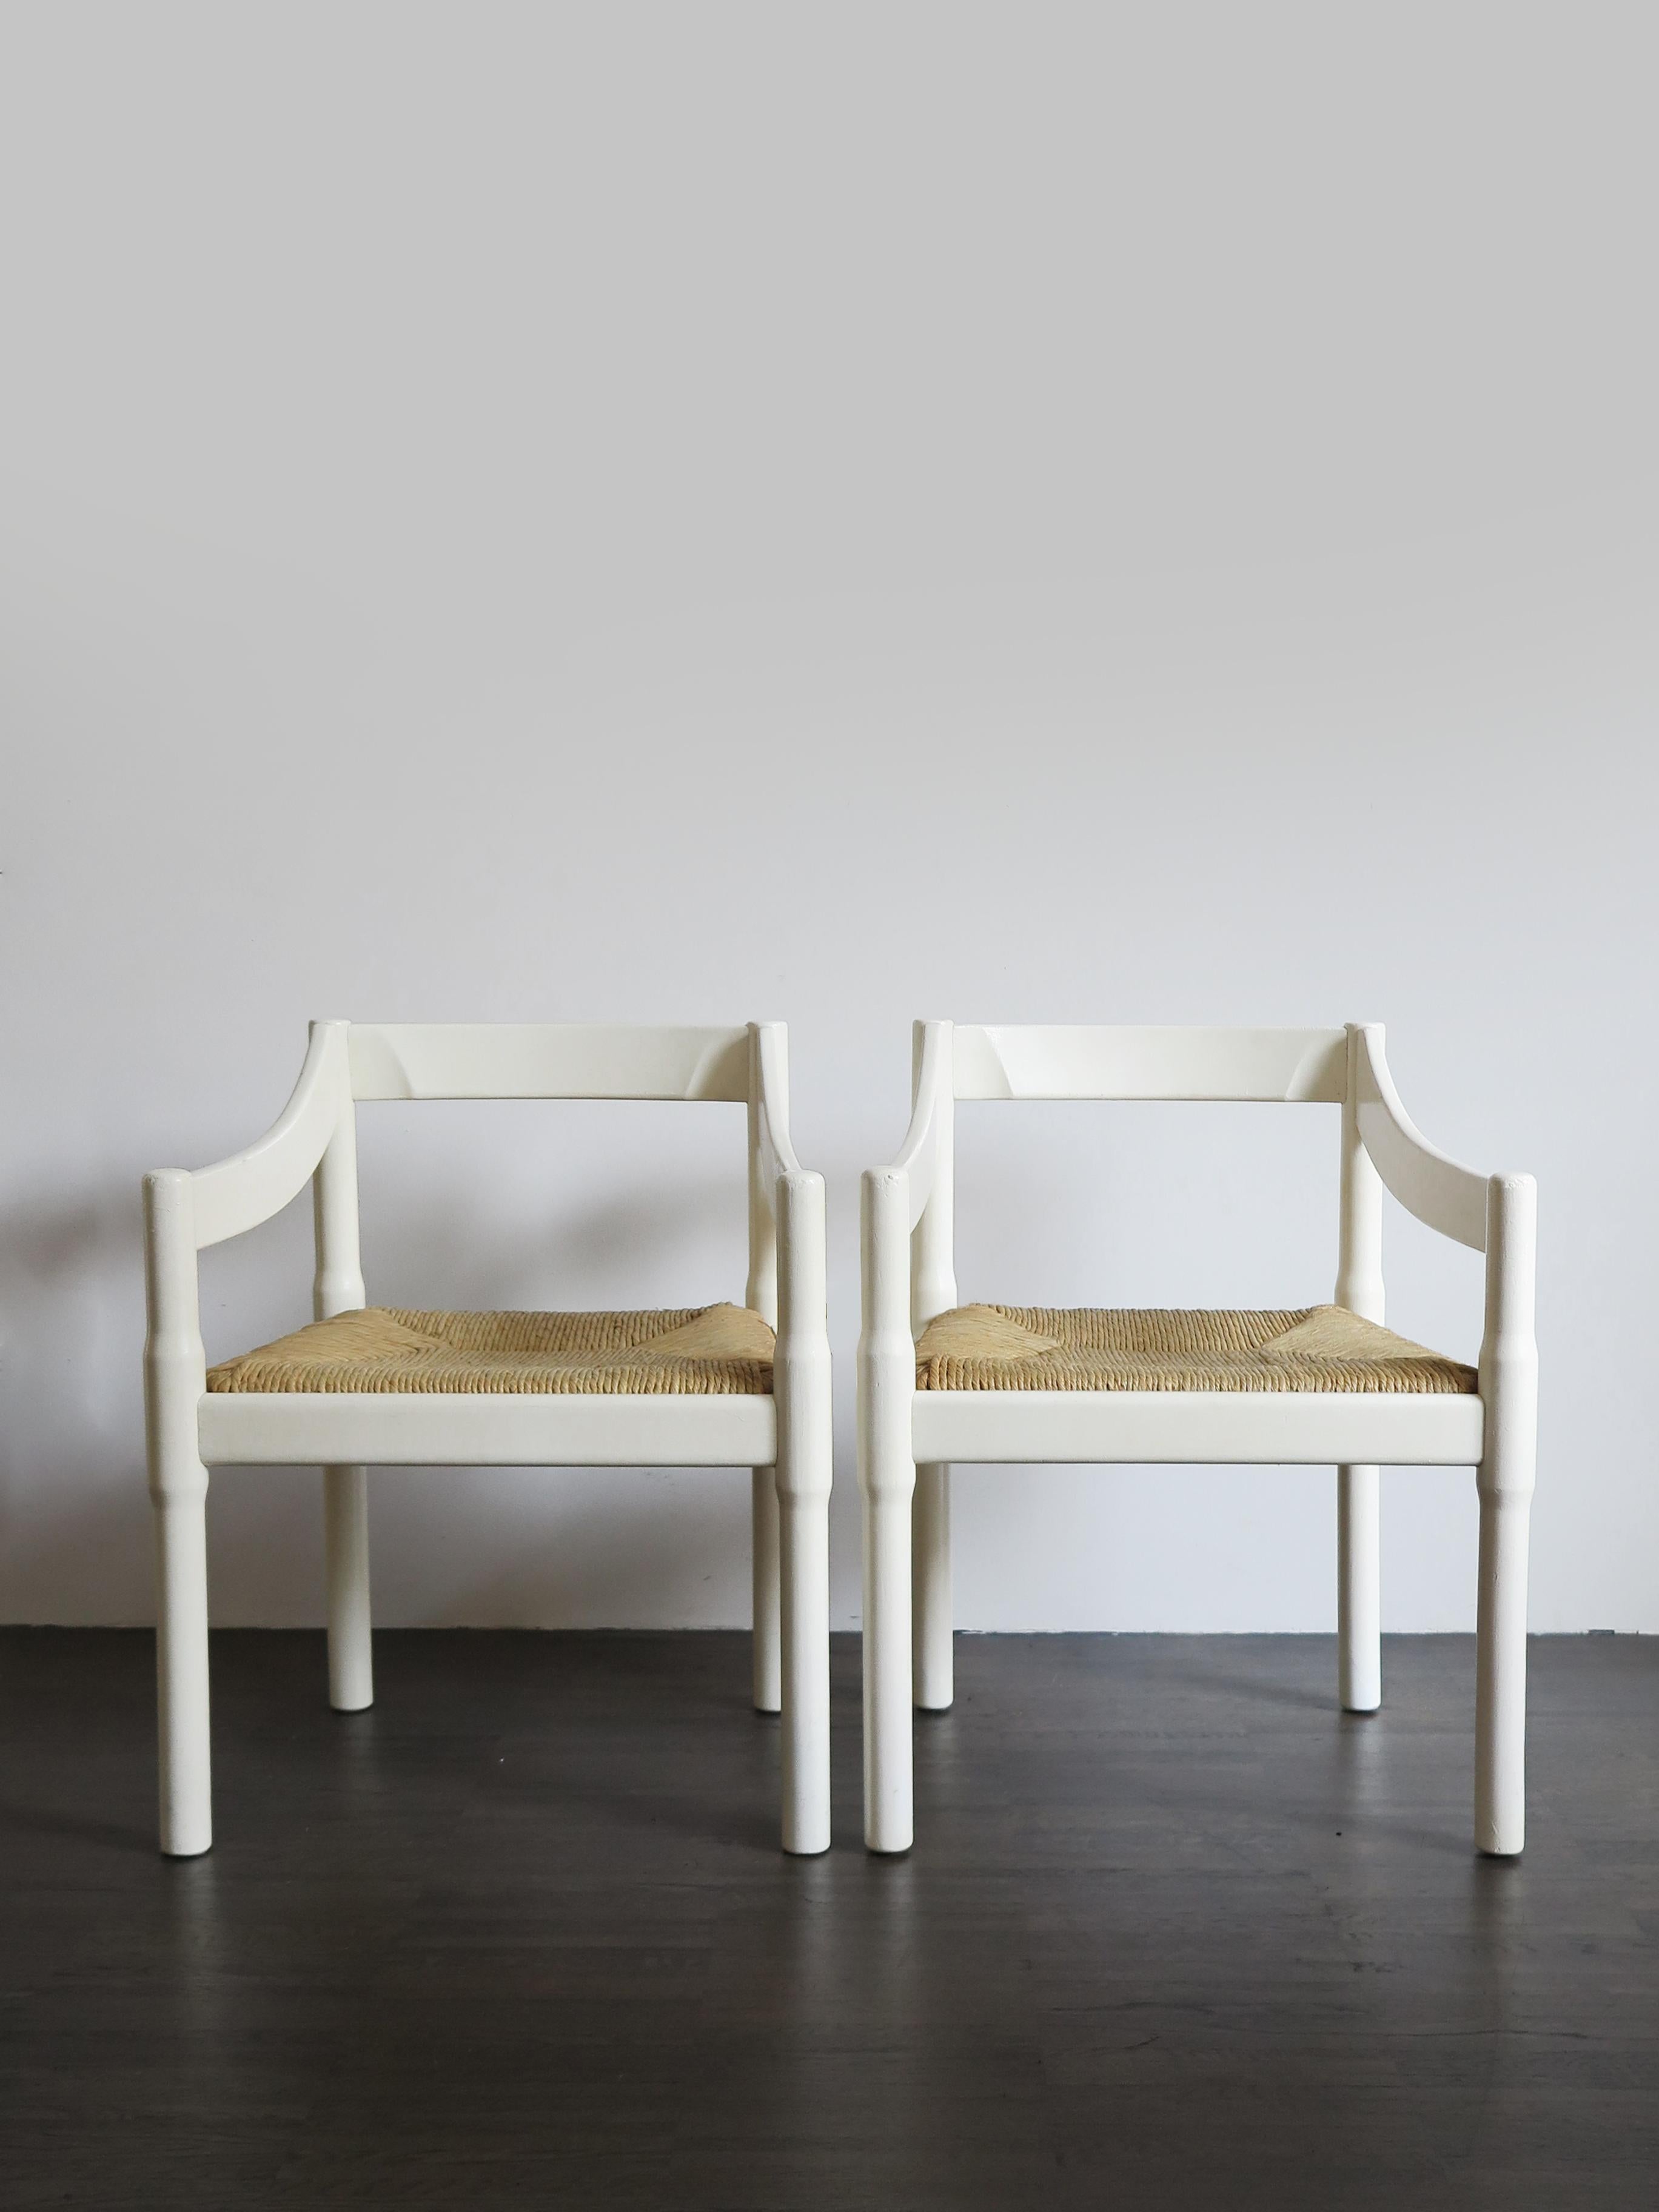 Set of two Italian mid-century armchairs model Carimate designed by Vico Magistretti for Country Club Carimate in Italy with aniline-stained beechwood frameand straw seat, produced by Comi then Artemide and finally Cassina, Italy 1960s

Literature